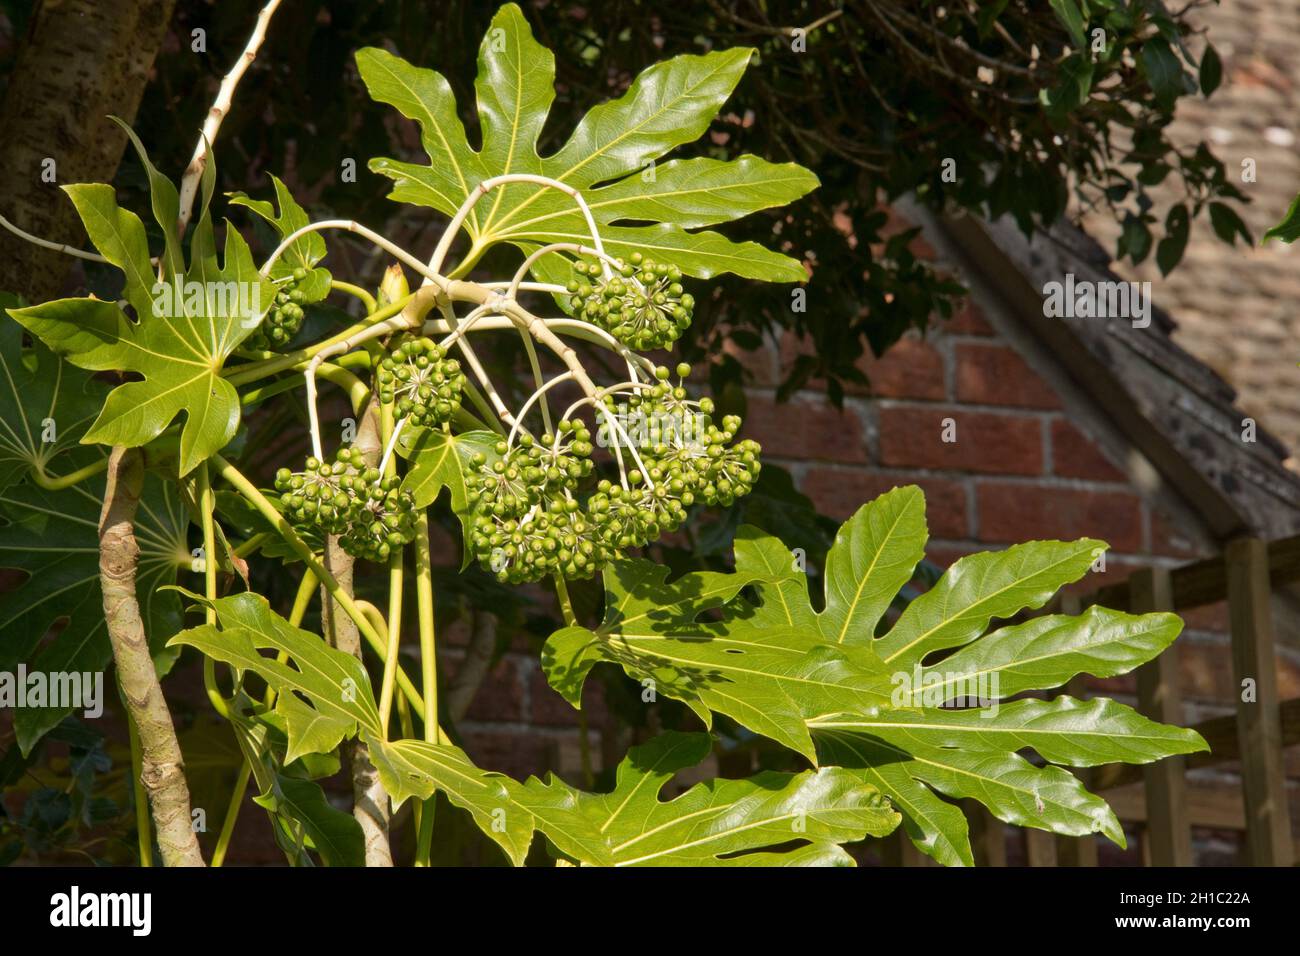 False castor oil plant (Fatsia japonica) glossy green palmately-lobed leaves and immature green clusters of fruit, Berkshire, April Stock Photo